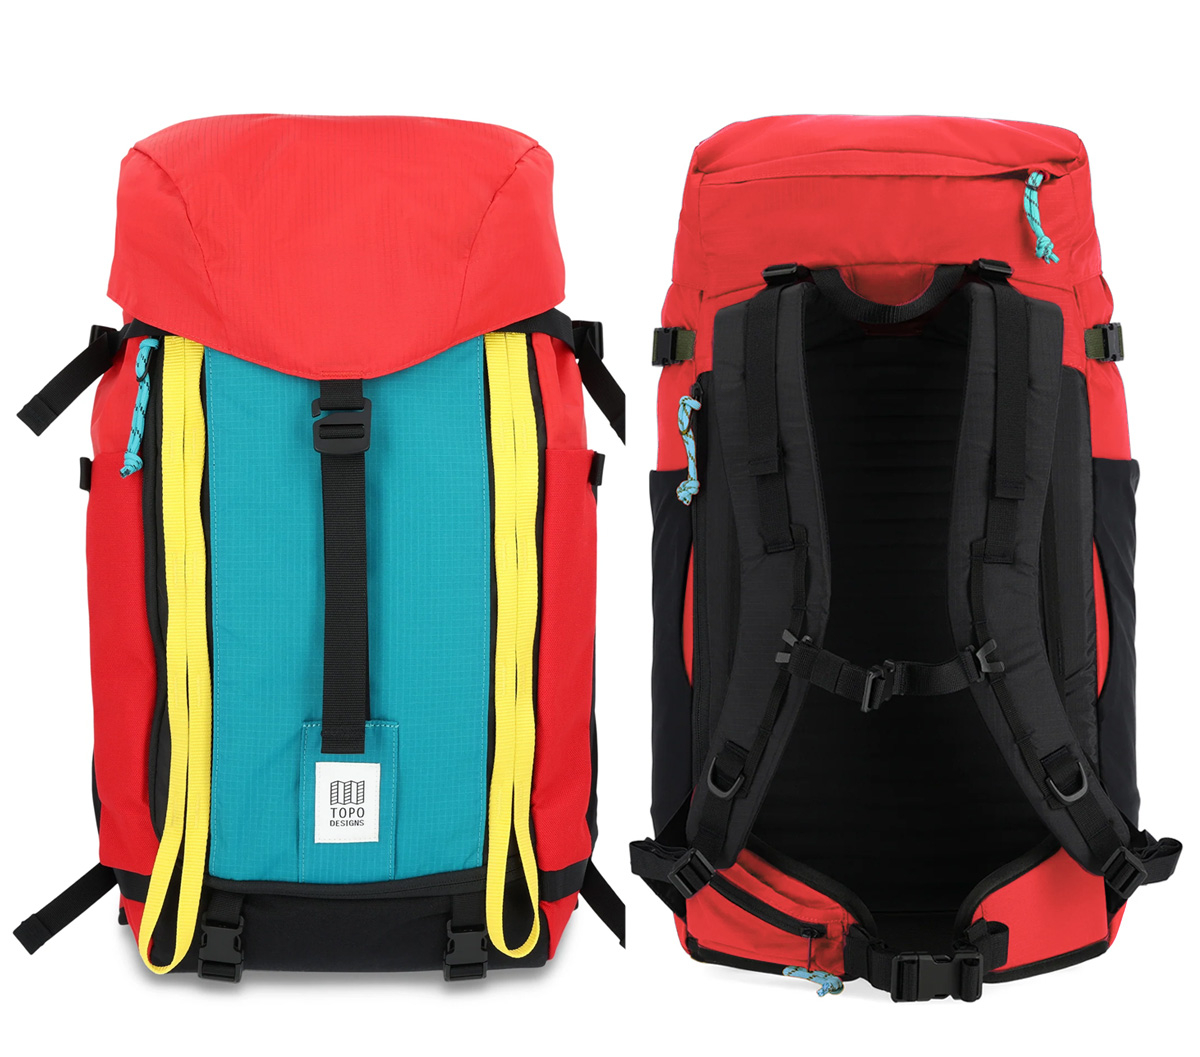 Topo Designs Mountain Pack 28L Red/Turquoise, front and back